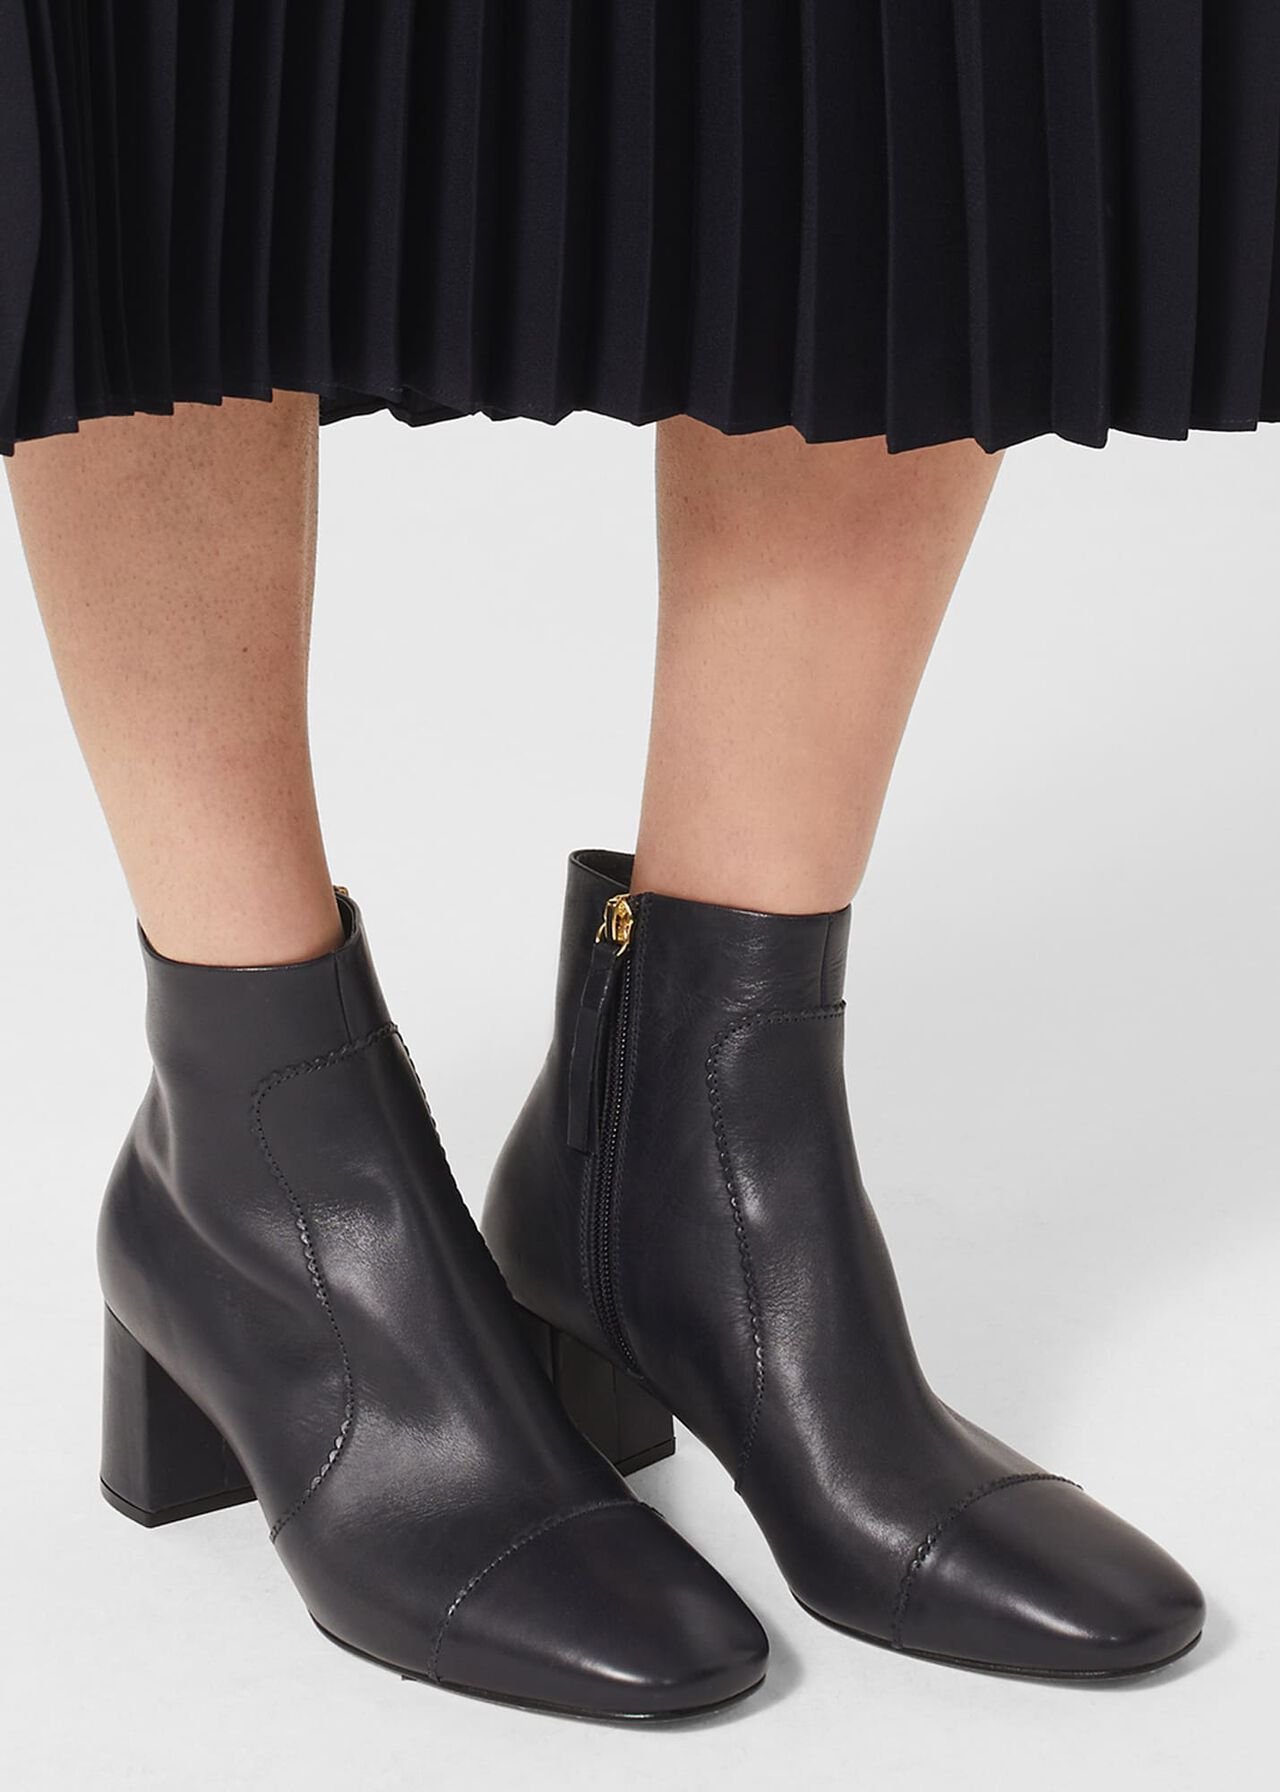 Leila Ankle Boot, Navy, hi-res